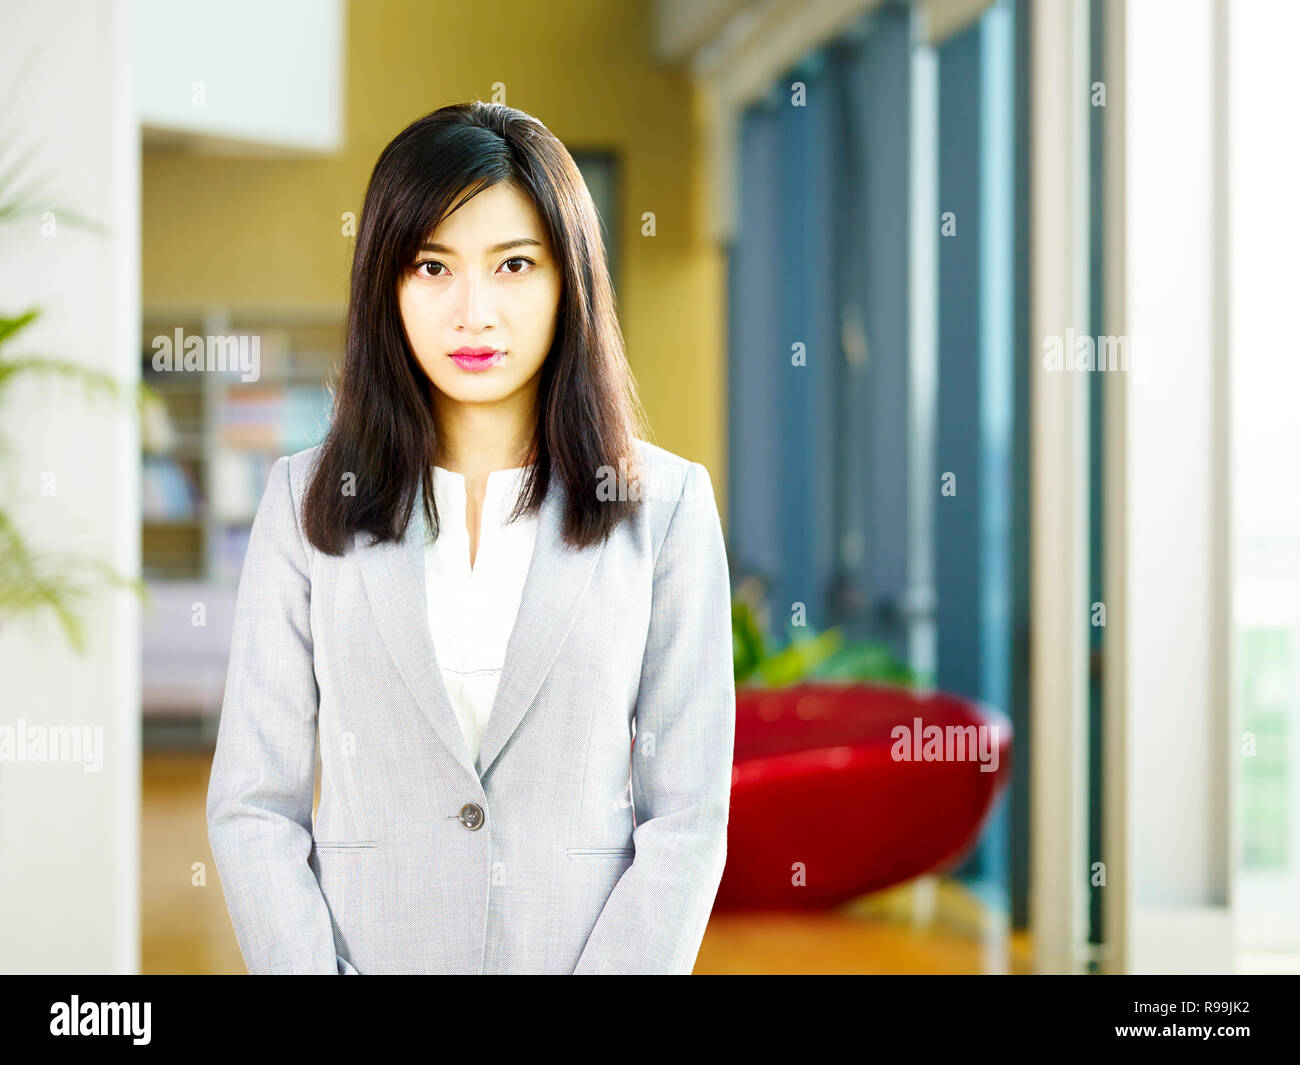 Social Portrait of a young asian business woman looking at camera. Banque D'Images